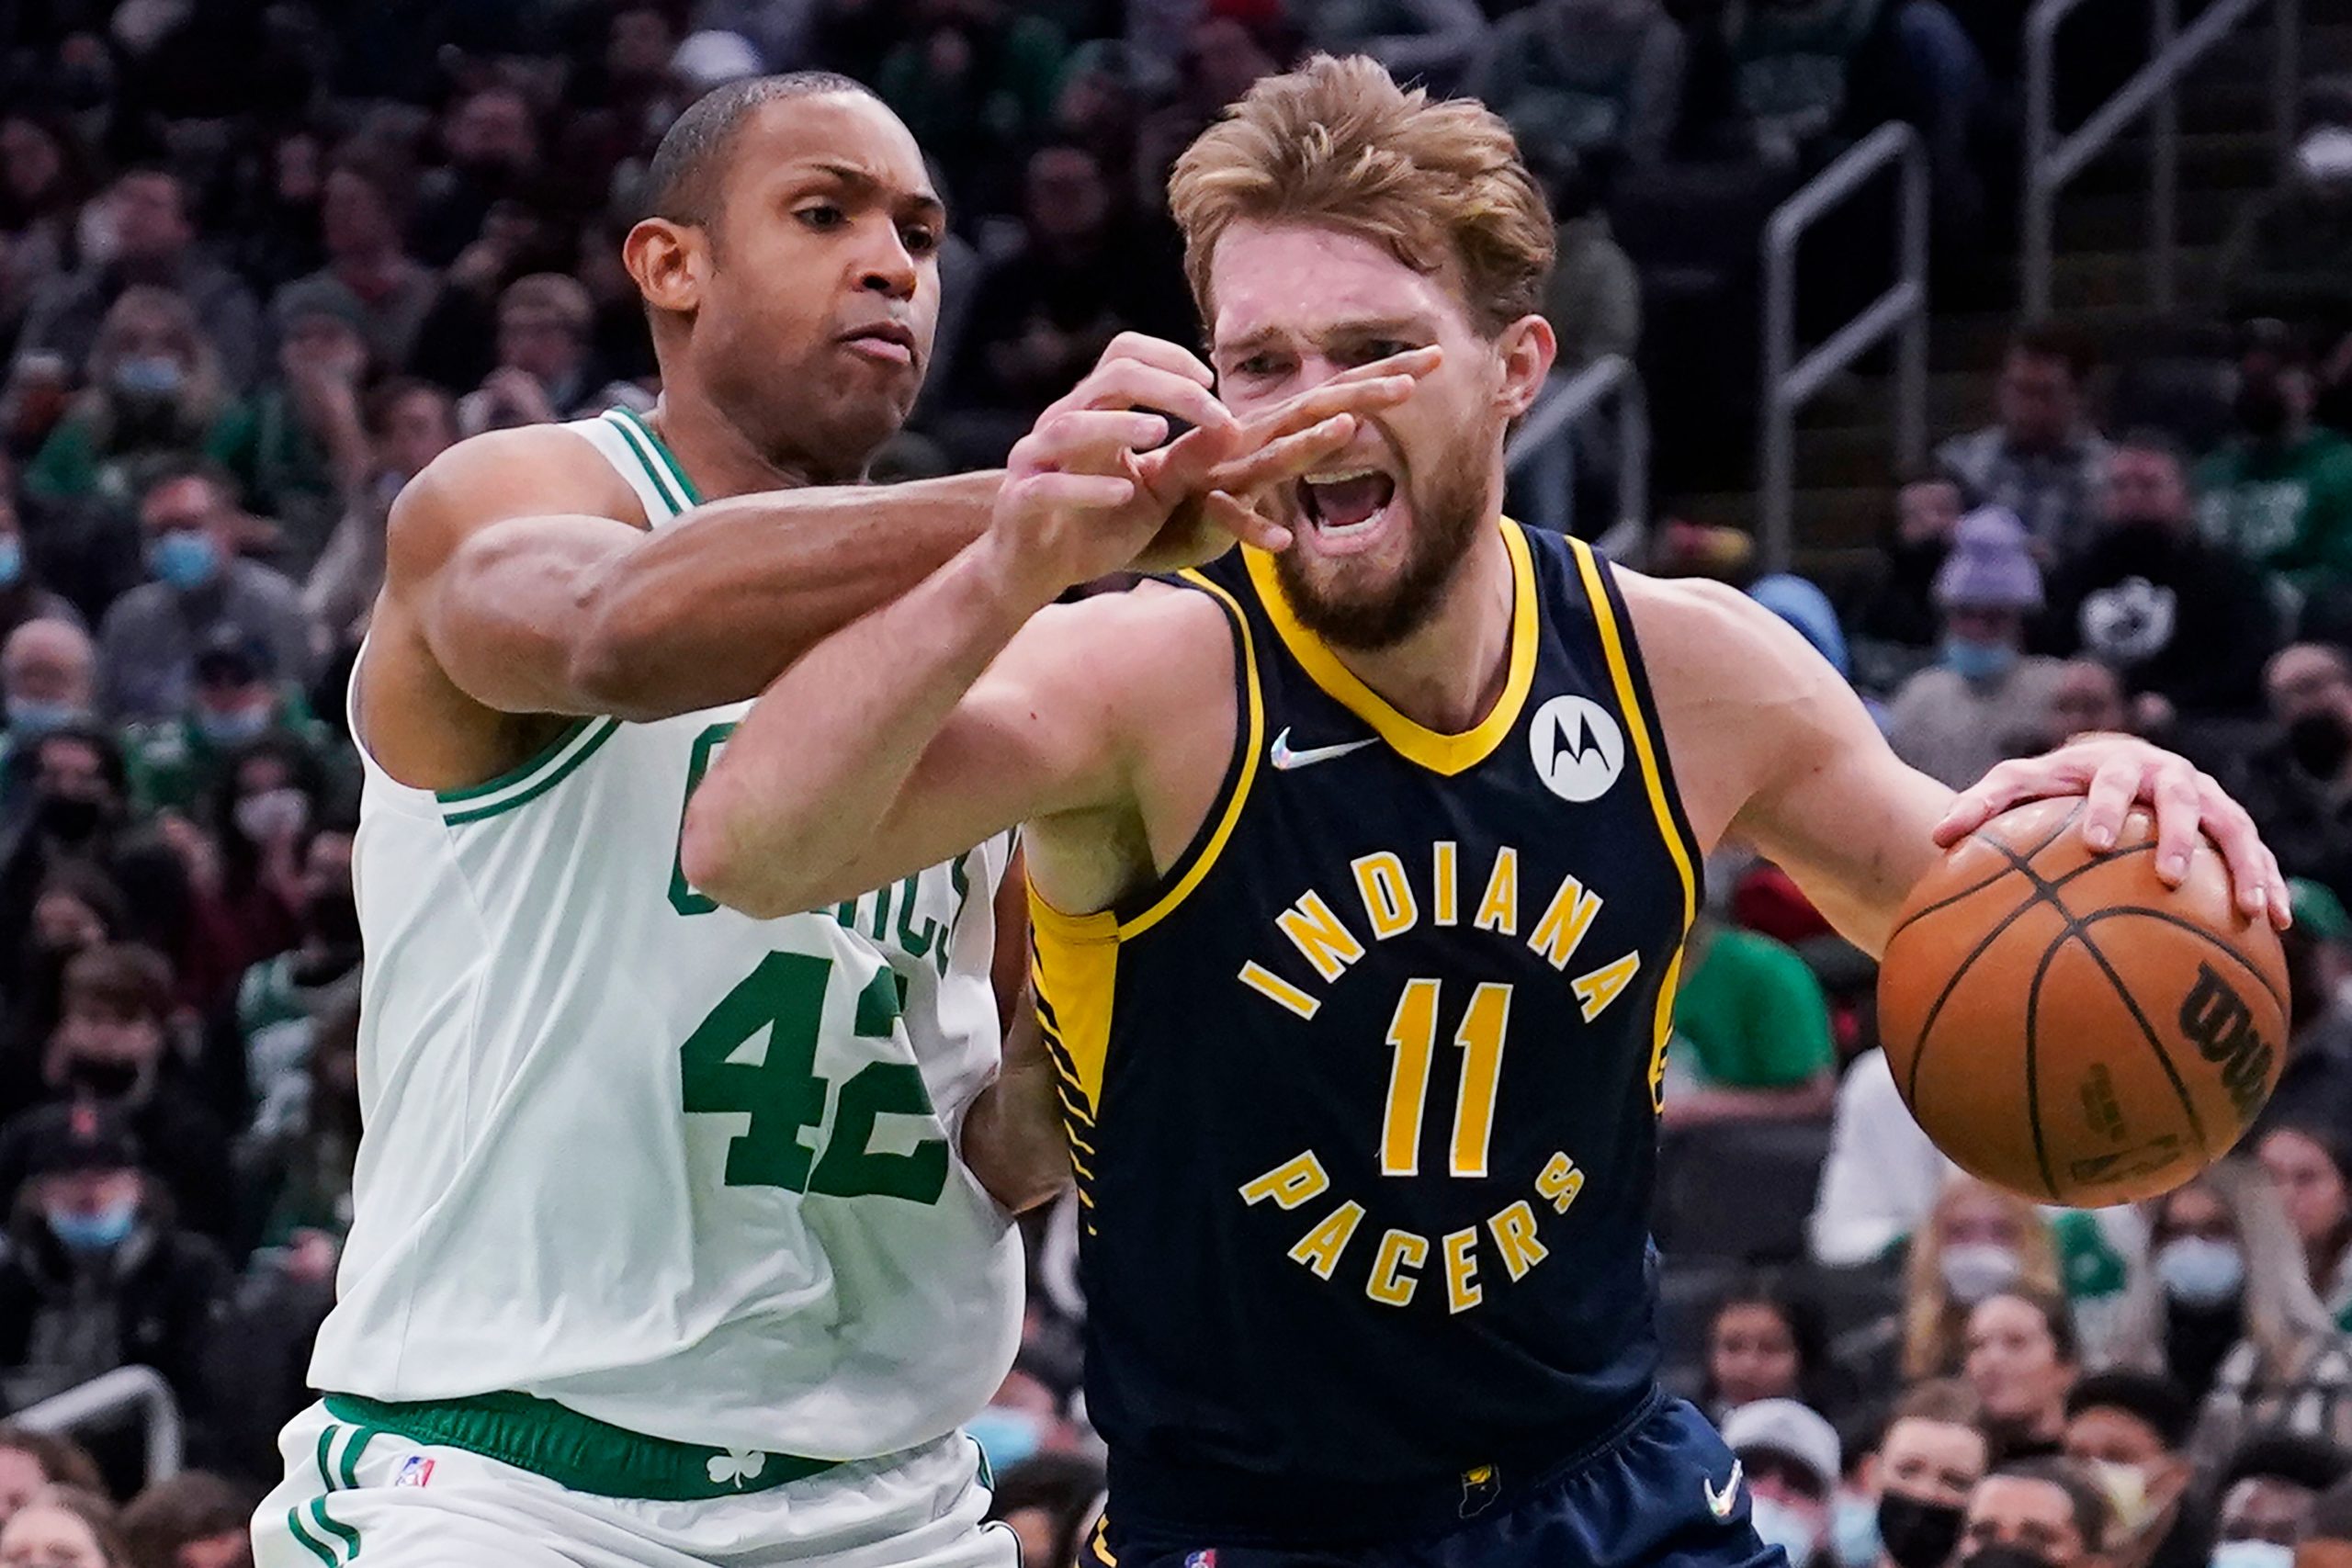 Boston Celtics take control early, pull away from Indiana Pacers 119-100